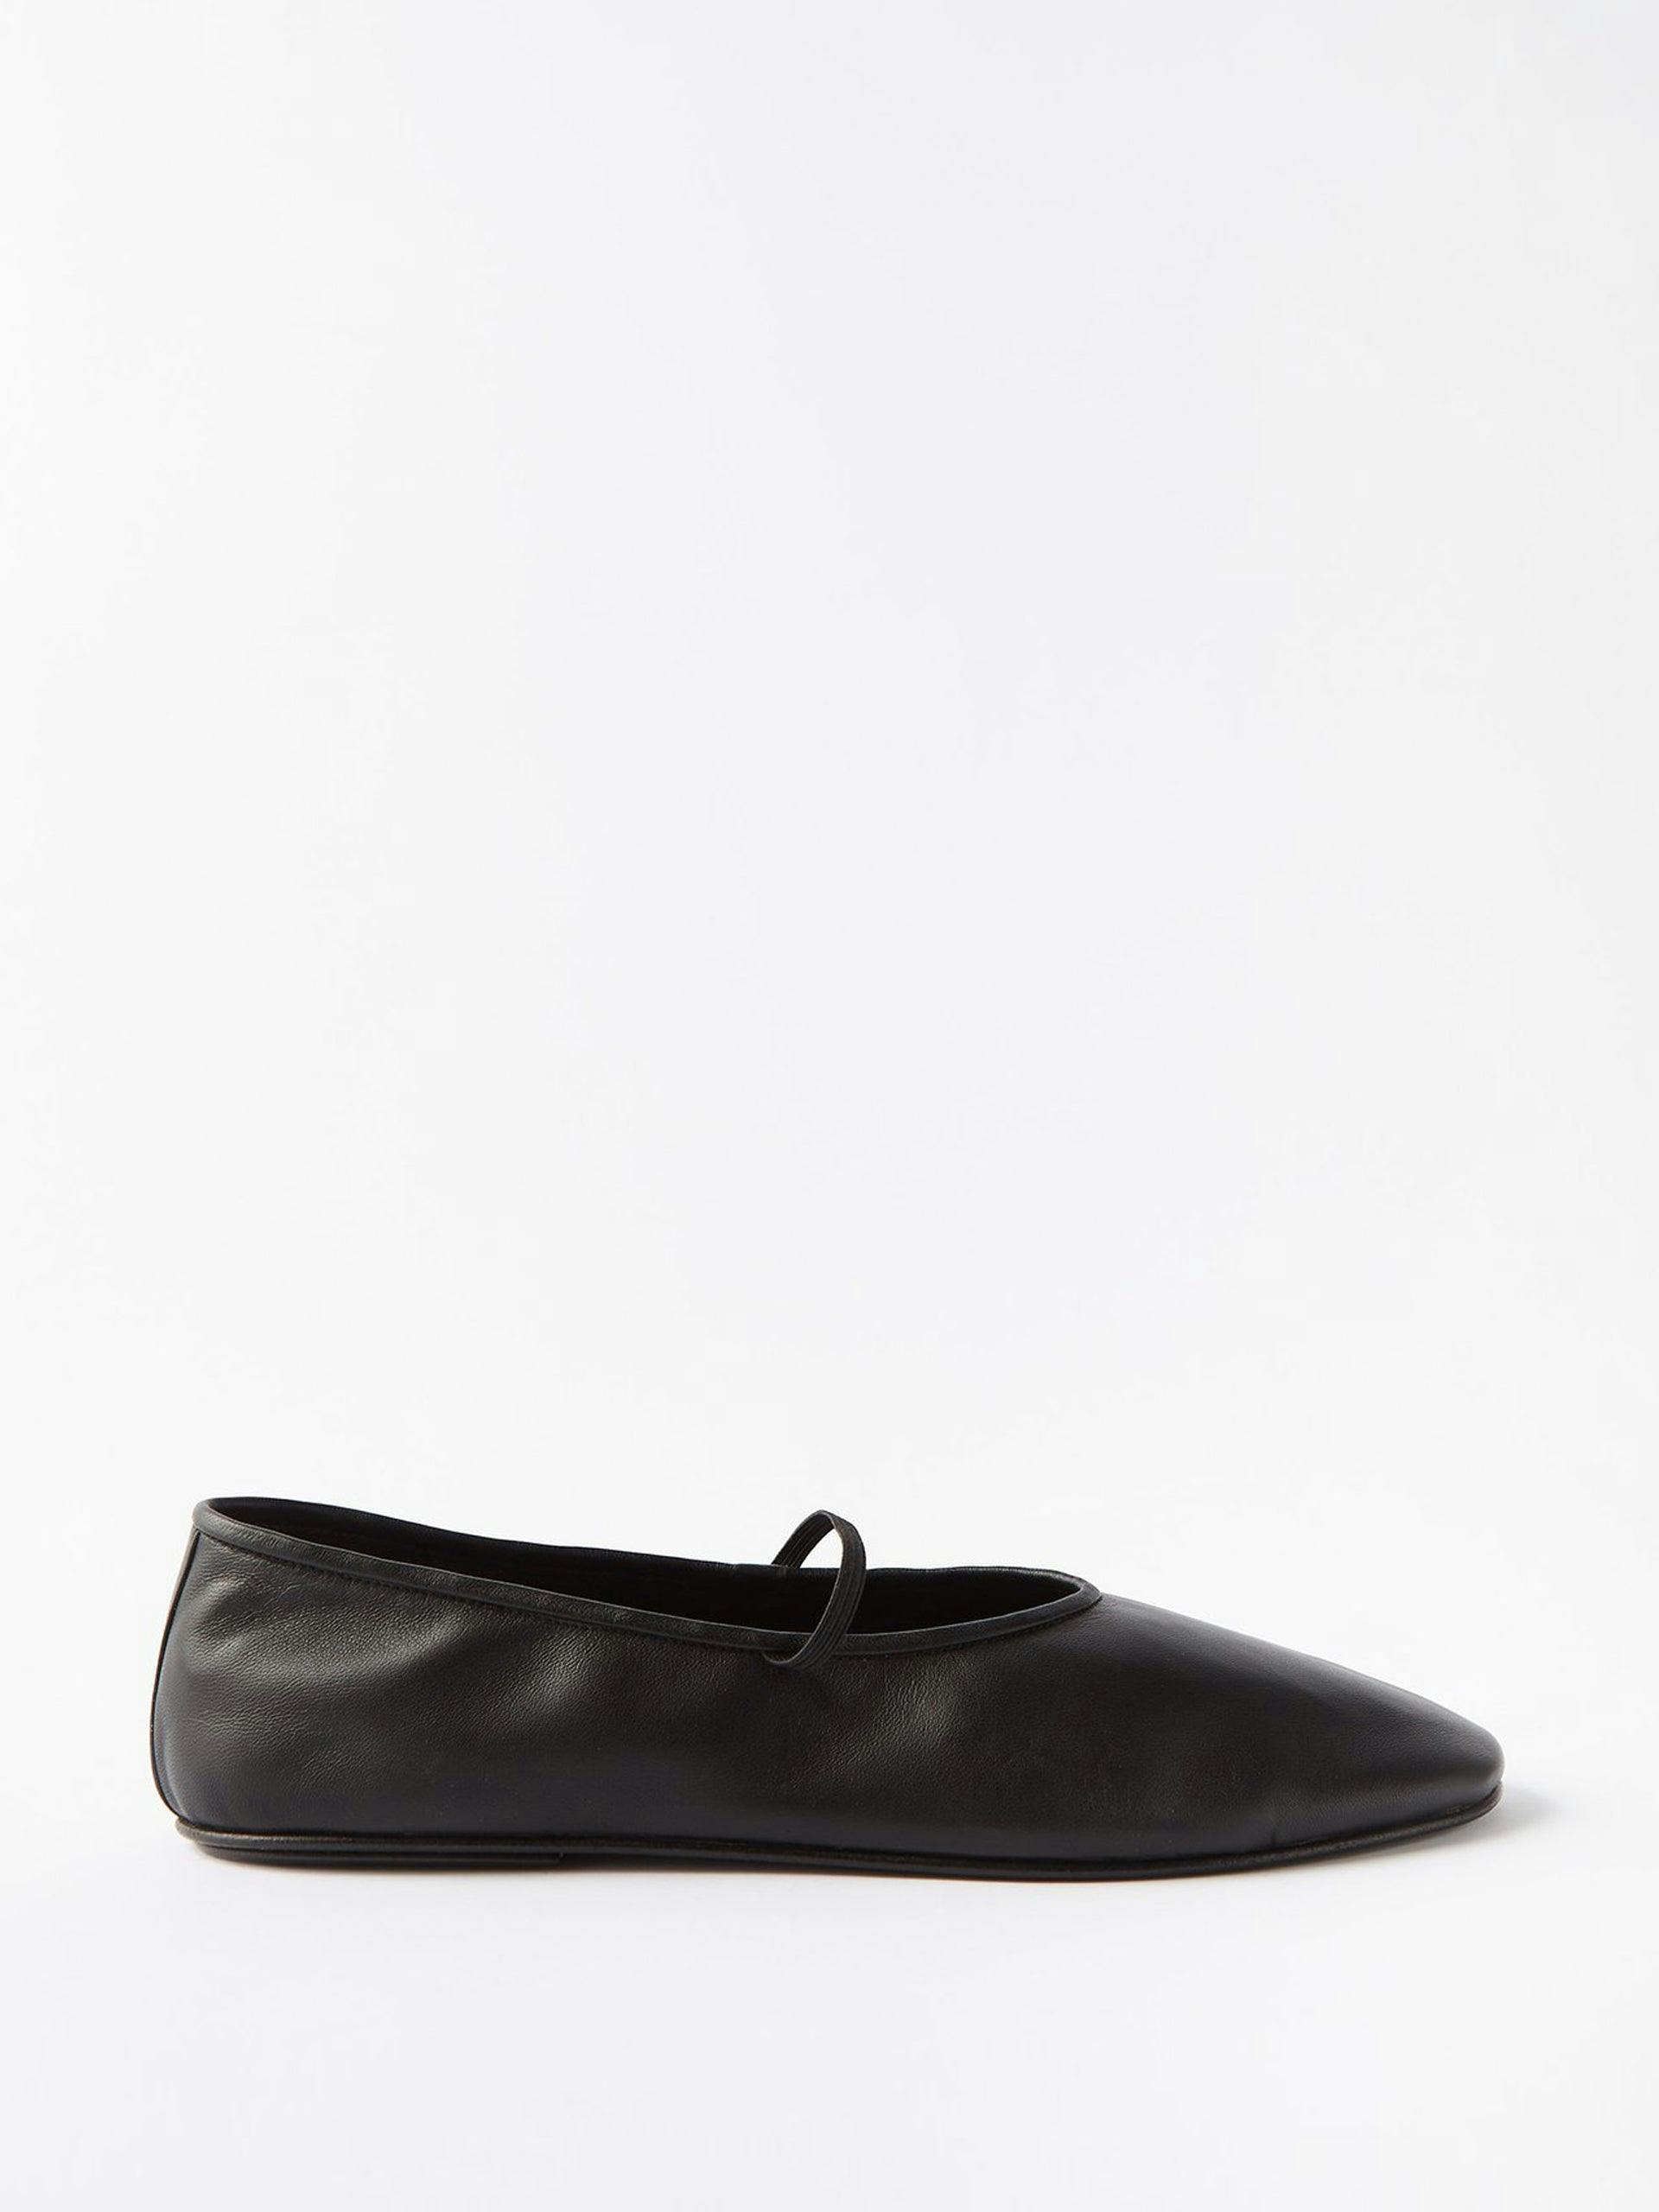 Round-toe leather ballet flats